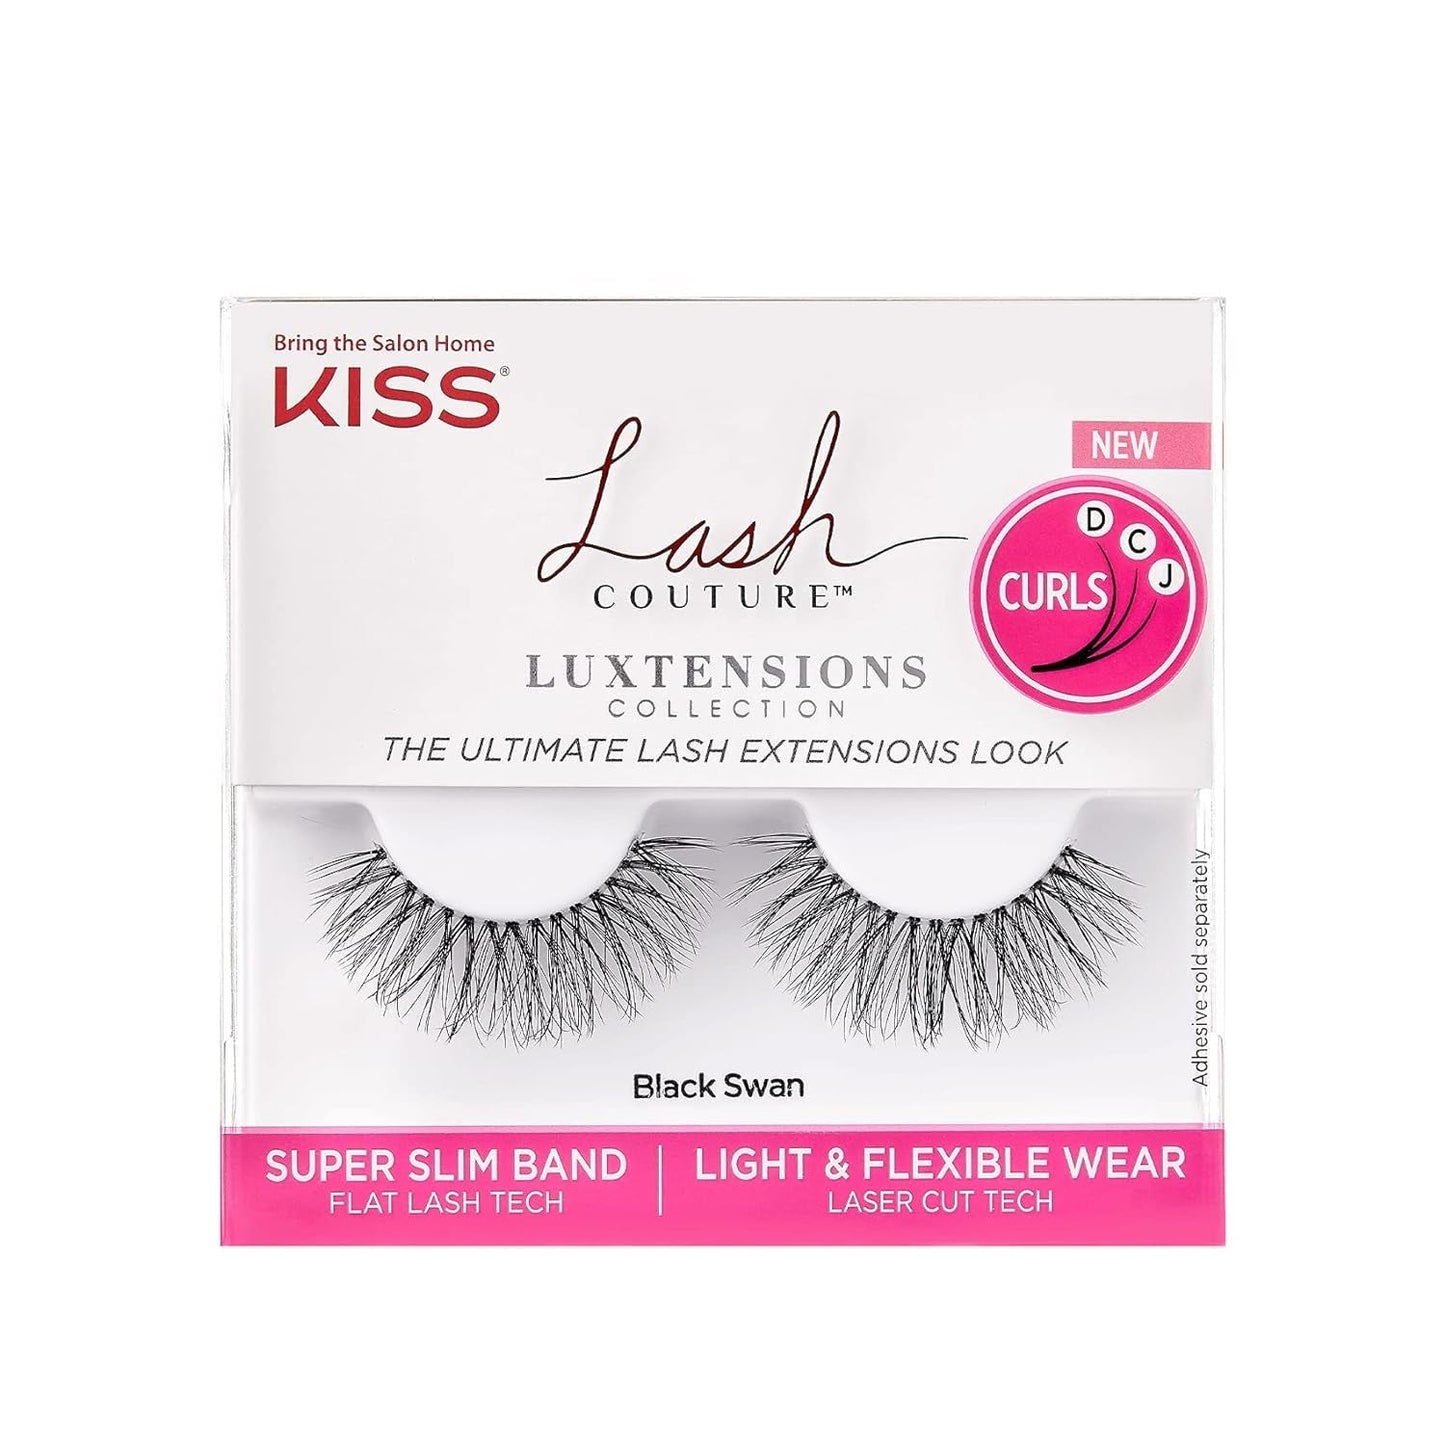 KISS Lash Couture Luxtension, False Eyelashes, Velvet', 12 Mm, Includes 1 Pair of Lashes, Contact Lens Friendly, Easy to Apply, Reusable Strip Lashes